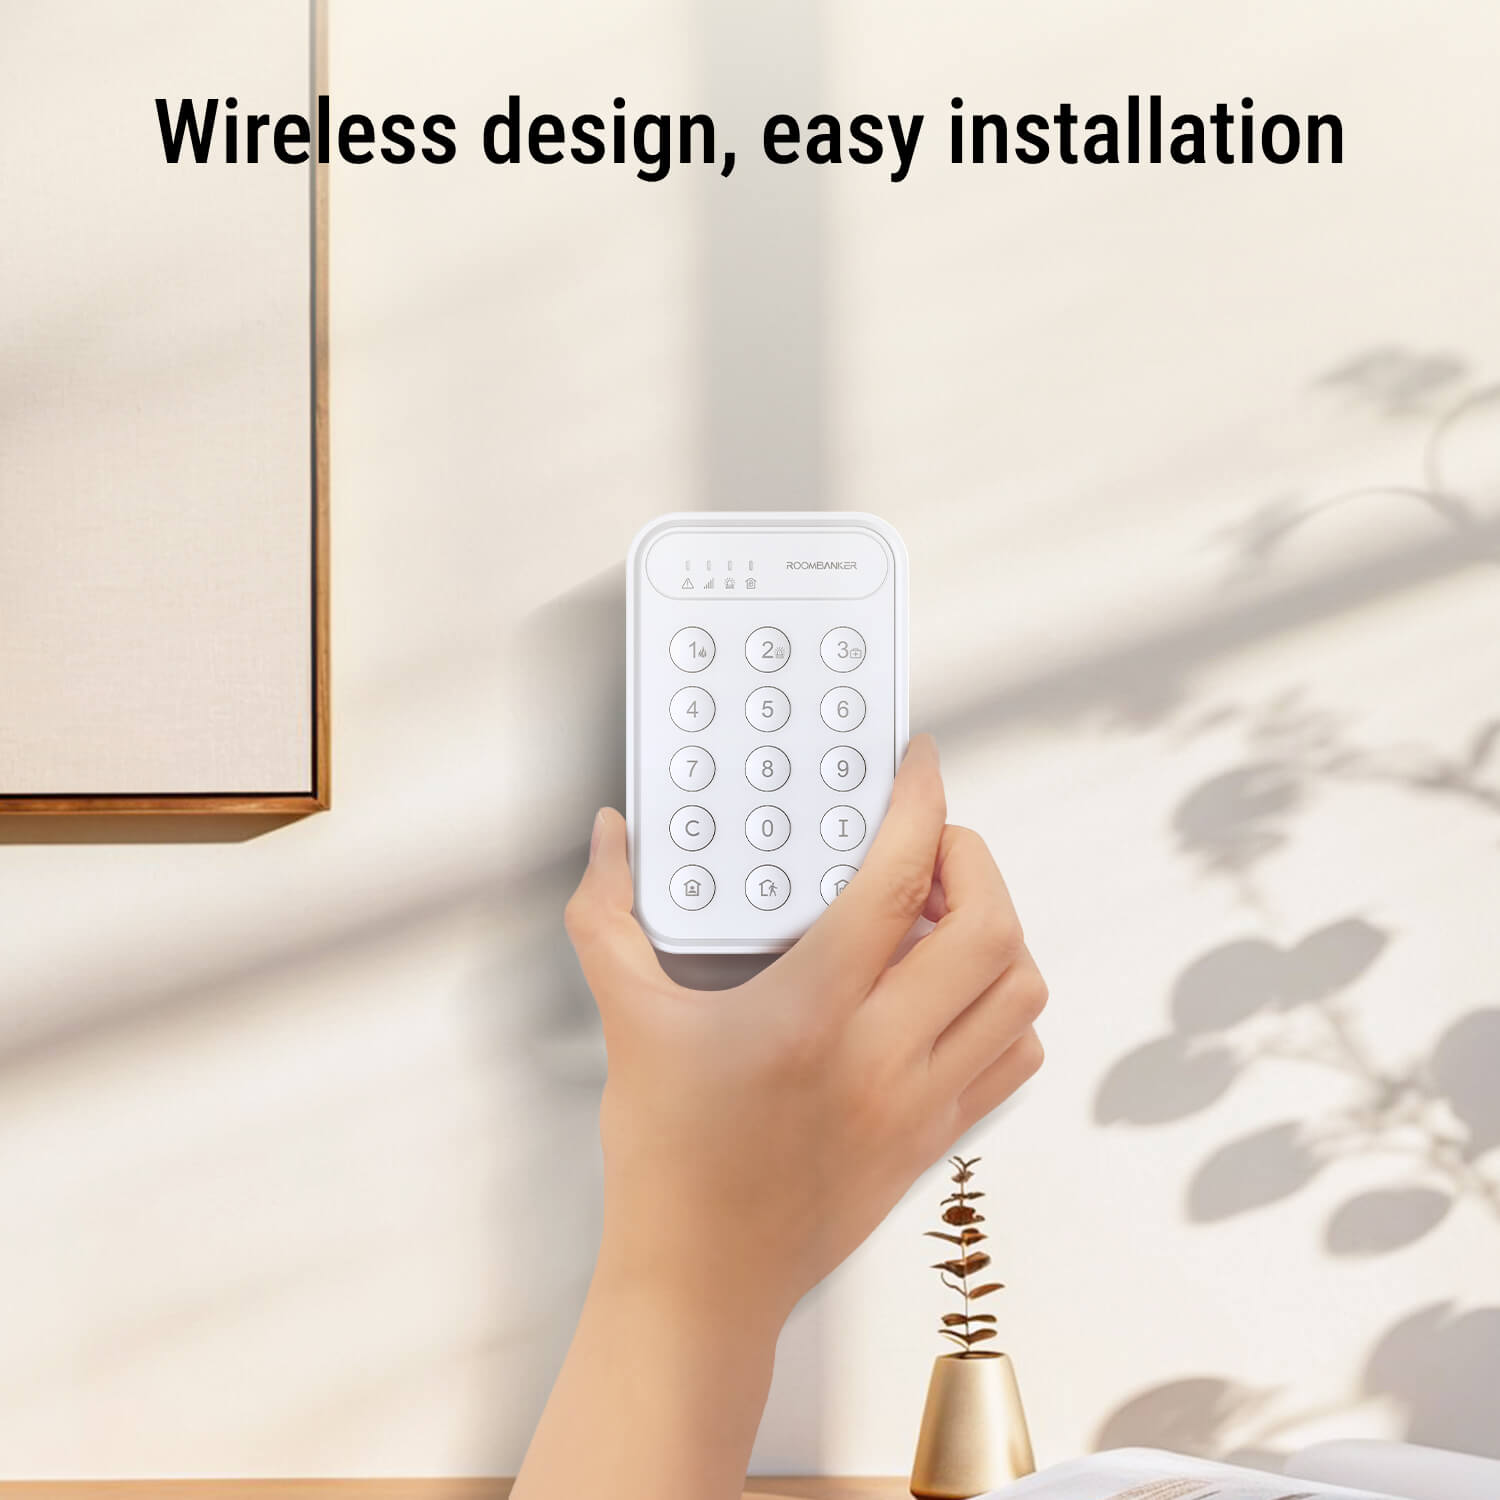 Keypad with One-Click Arming/Disarming, Advanced Encryption, Long-Range Communication - Requires Roombanker Hub